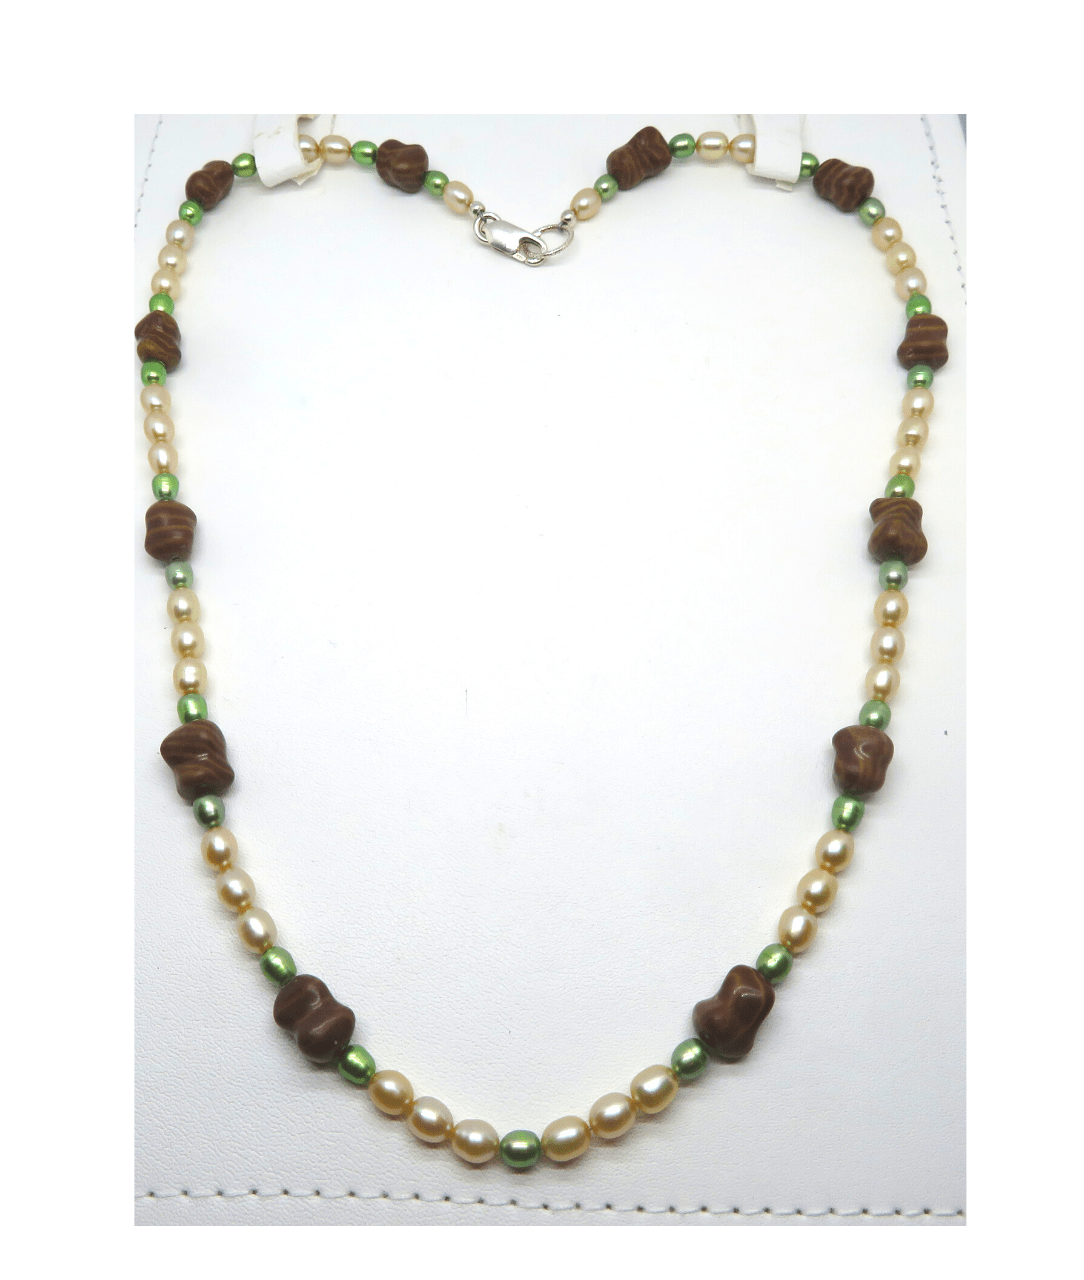 Golden, Green Pearls, Unique Carved Brown Jasper Handmade Sterling Necklace Approx. 21" Includes Removeable Quartz Druzy Enhancer Pendant 2 1/4"L X 1/2"W. ONE ONLY.